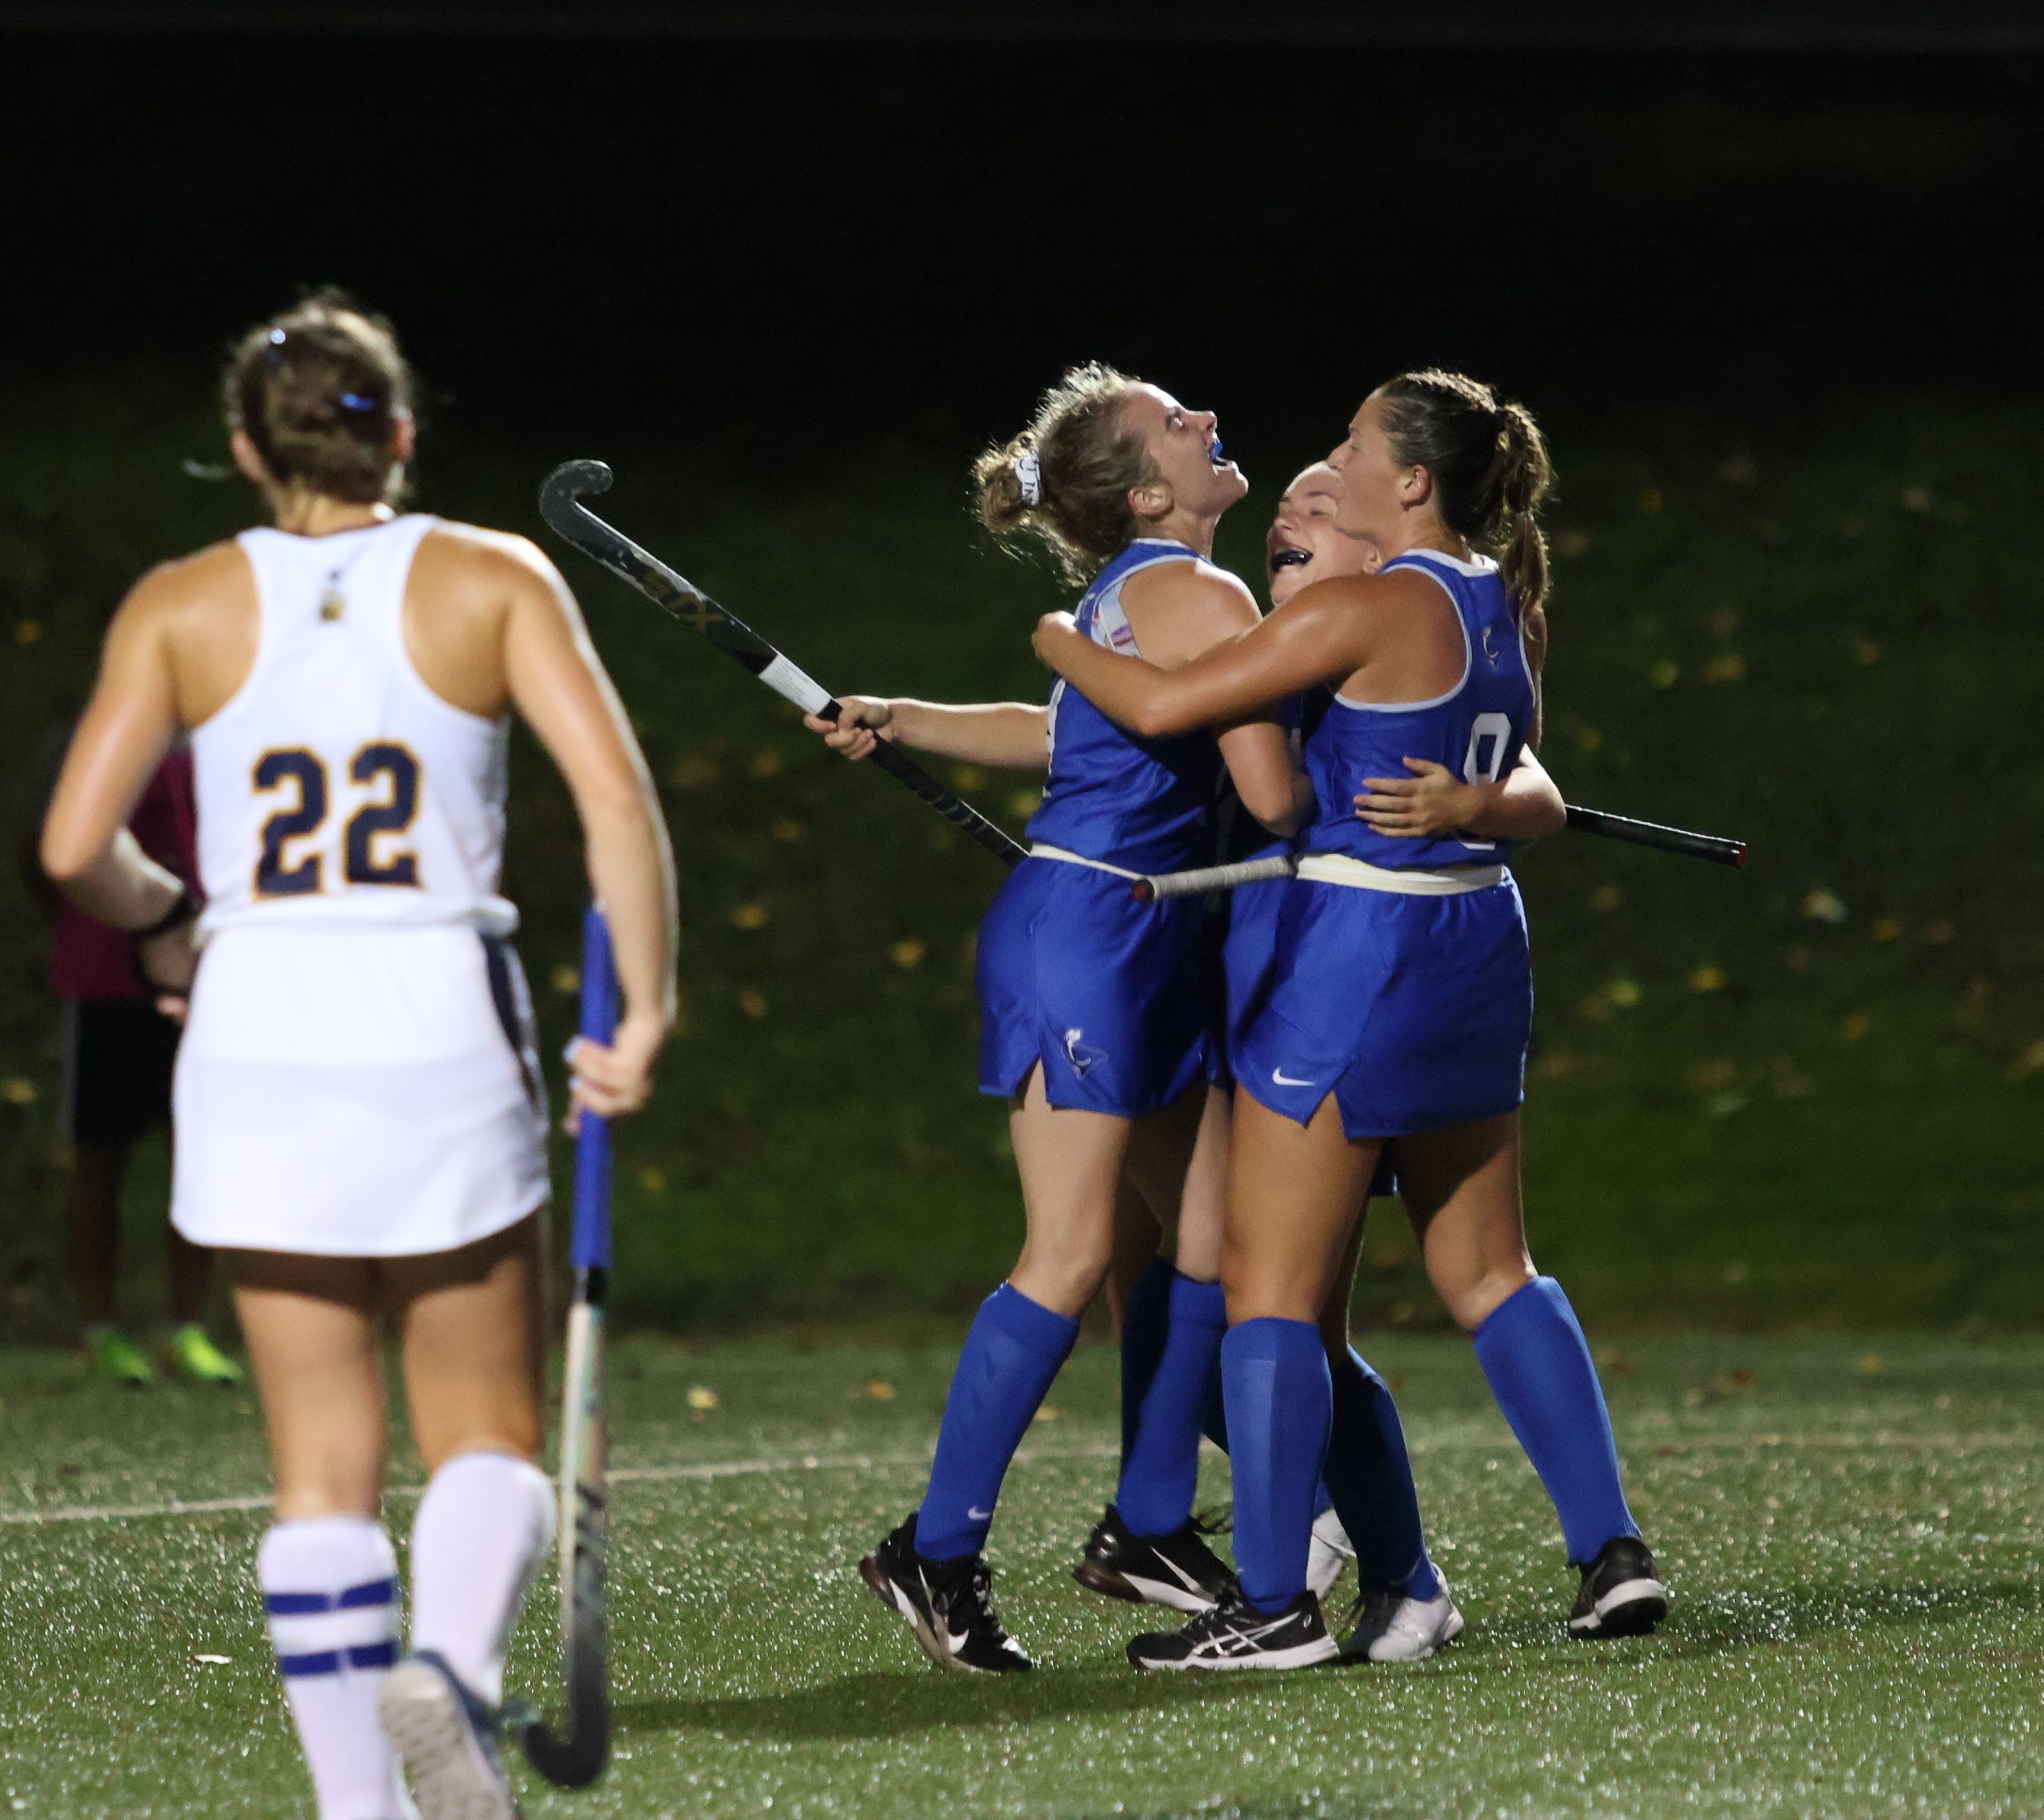 The celebration after the game winning goal. Photo by Thomas Ryan.